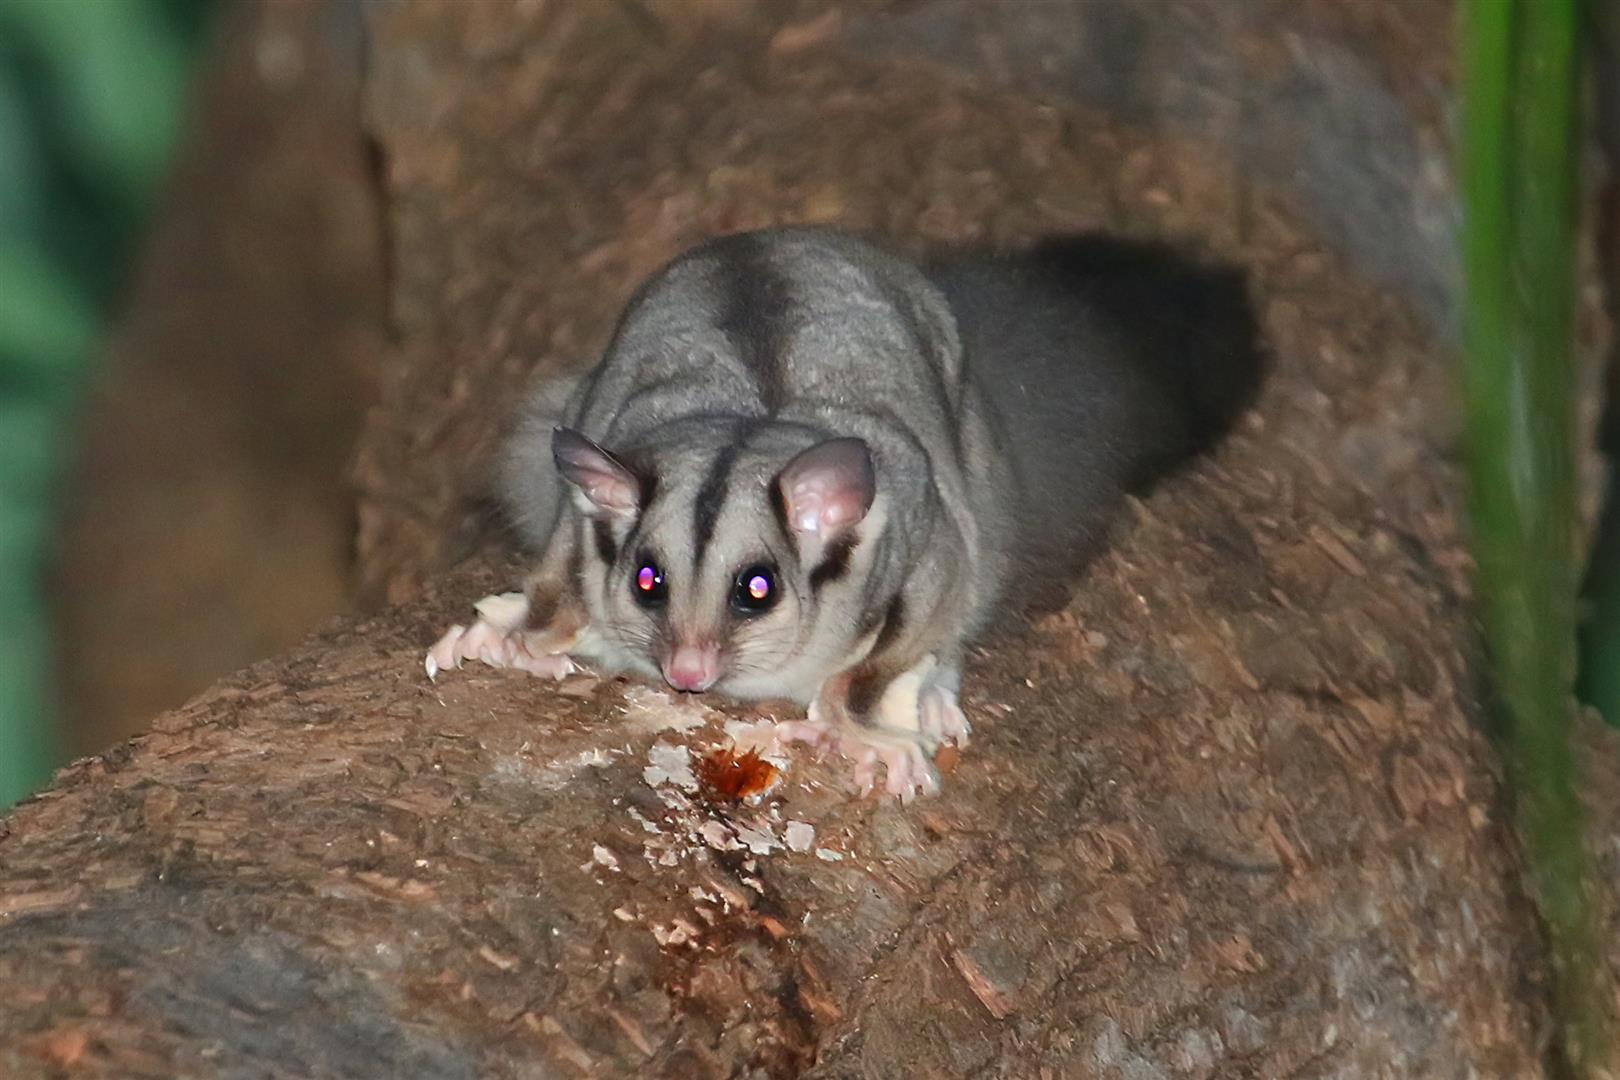 Squirrel Gliders (Petaurus breviceps) are one of three smaller species of gliders found at Carnarvon. Sleeping in family groups in tree hollows, they emerge quietly at night to feed on gum sap, nectar and insects.